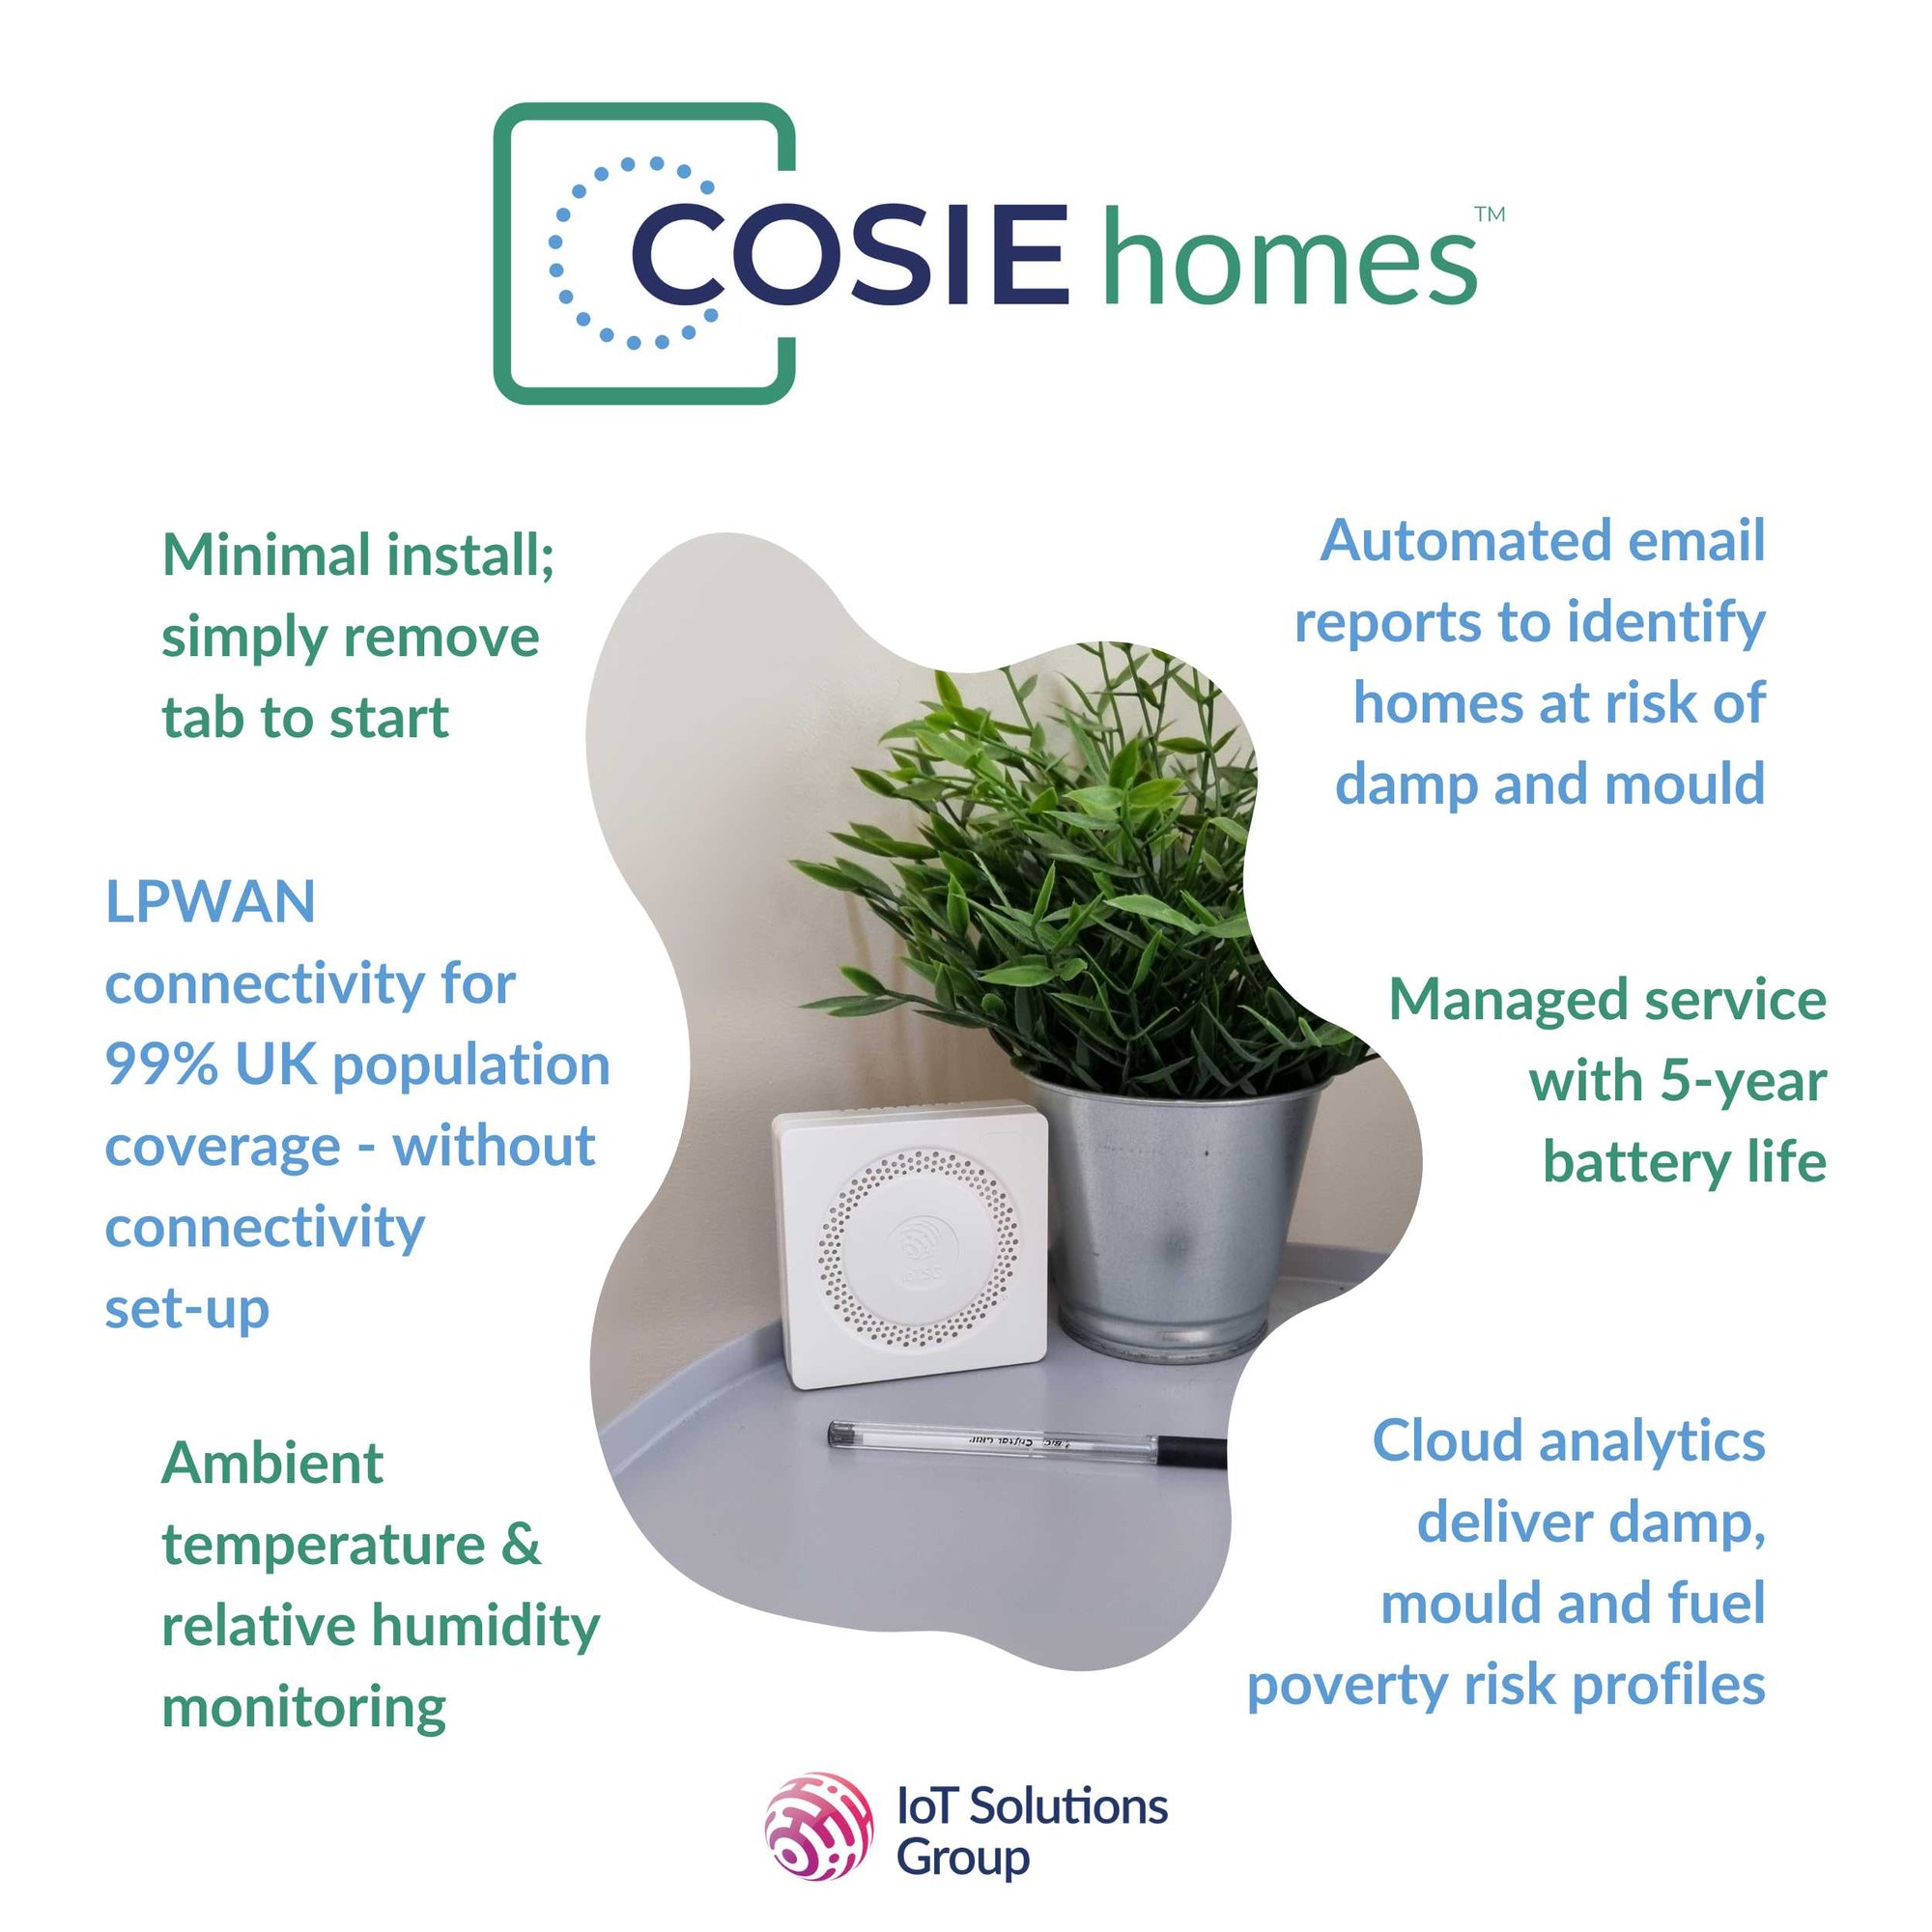 COSIE homes - features (1)